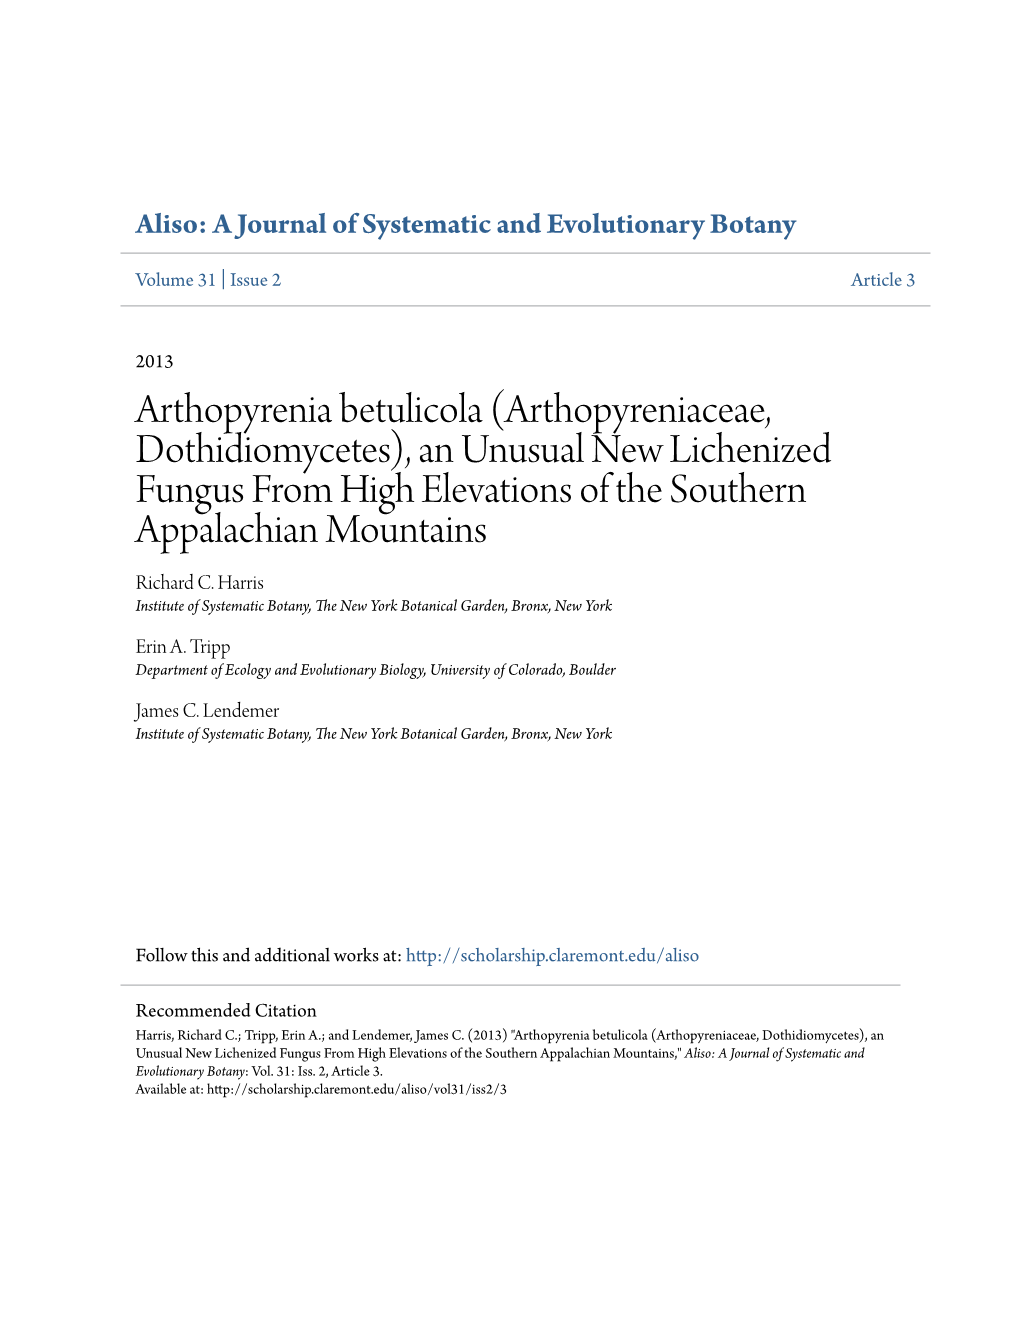 Arthopyrenia Betulicola (Arthopyreniaceae, Dothidiomycetes), an Unusual New Lichenized Fungus from High Elevations of the Southern Appalachian Mountains Richard C